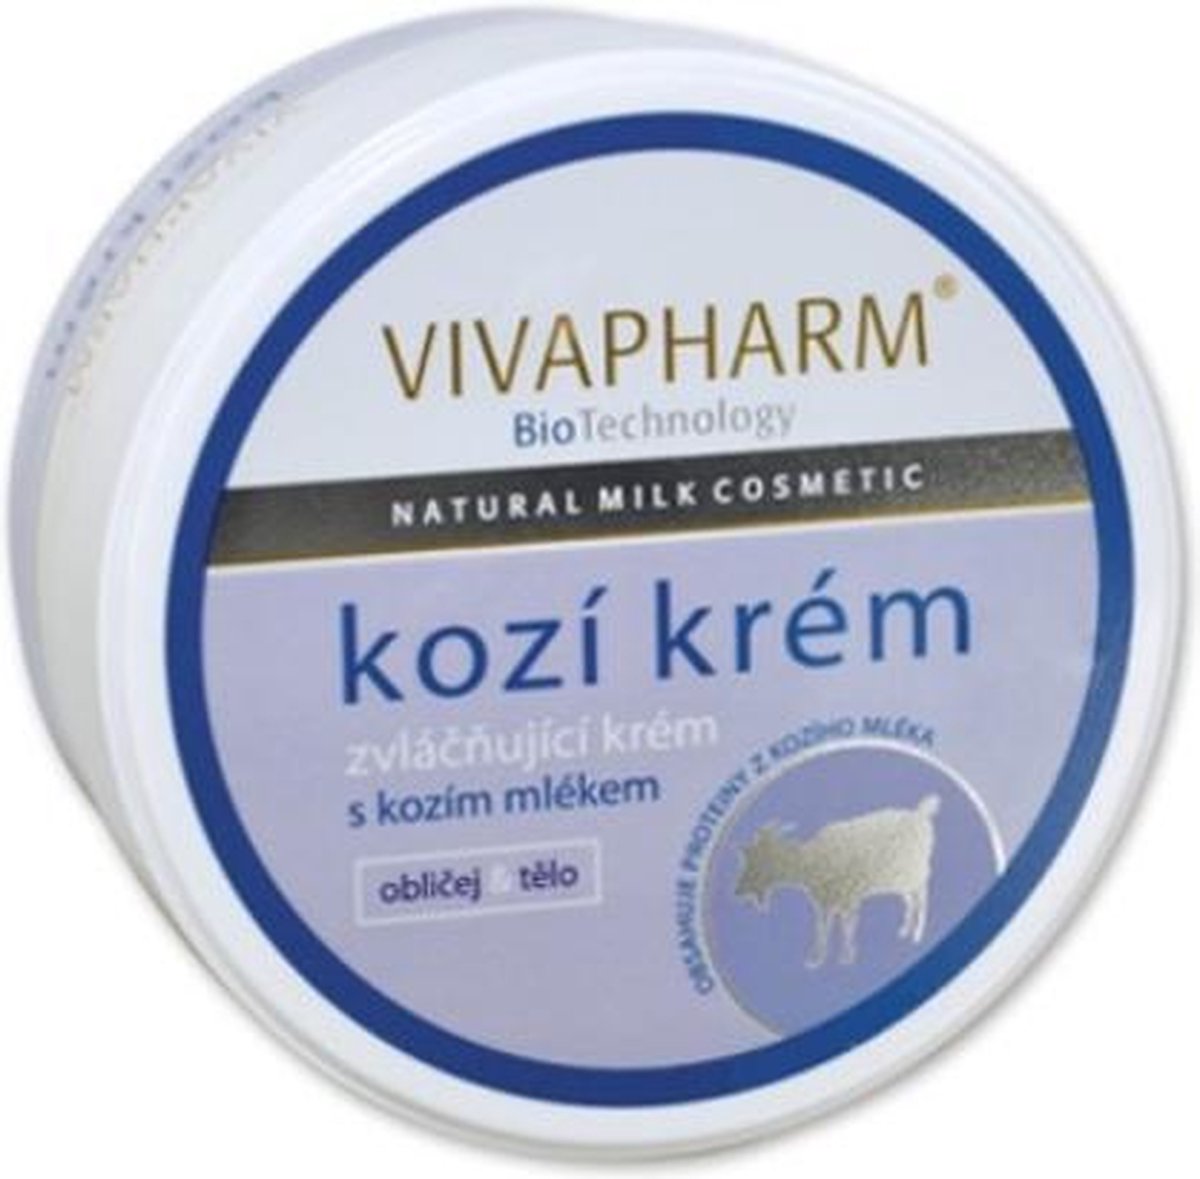 Vivapharm - Softening Cream For The Face And Body With Goat'S Milk